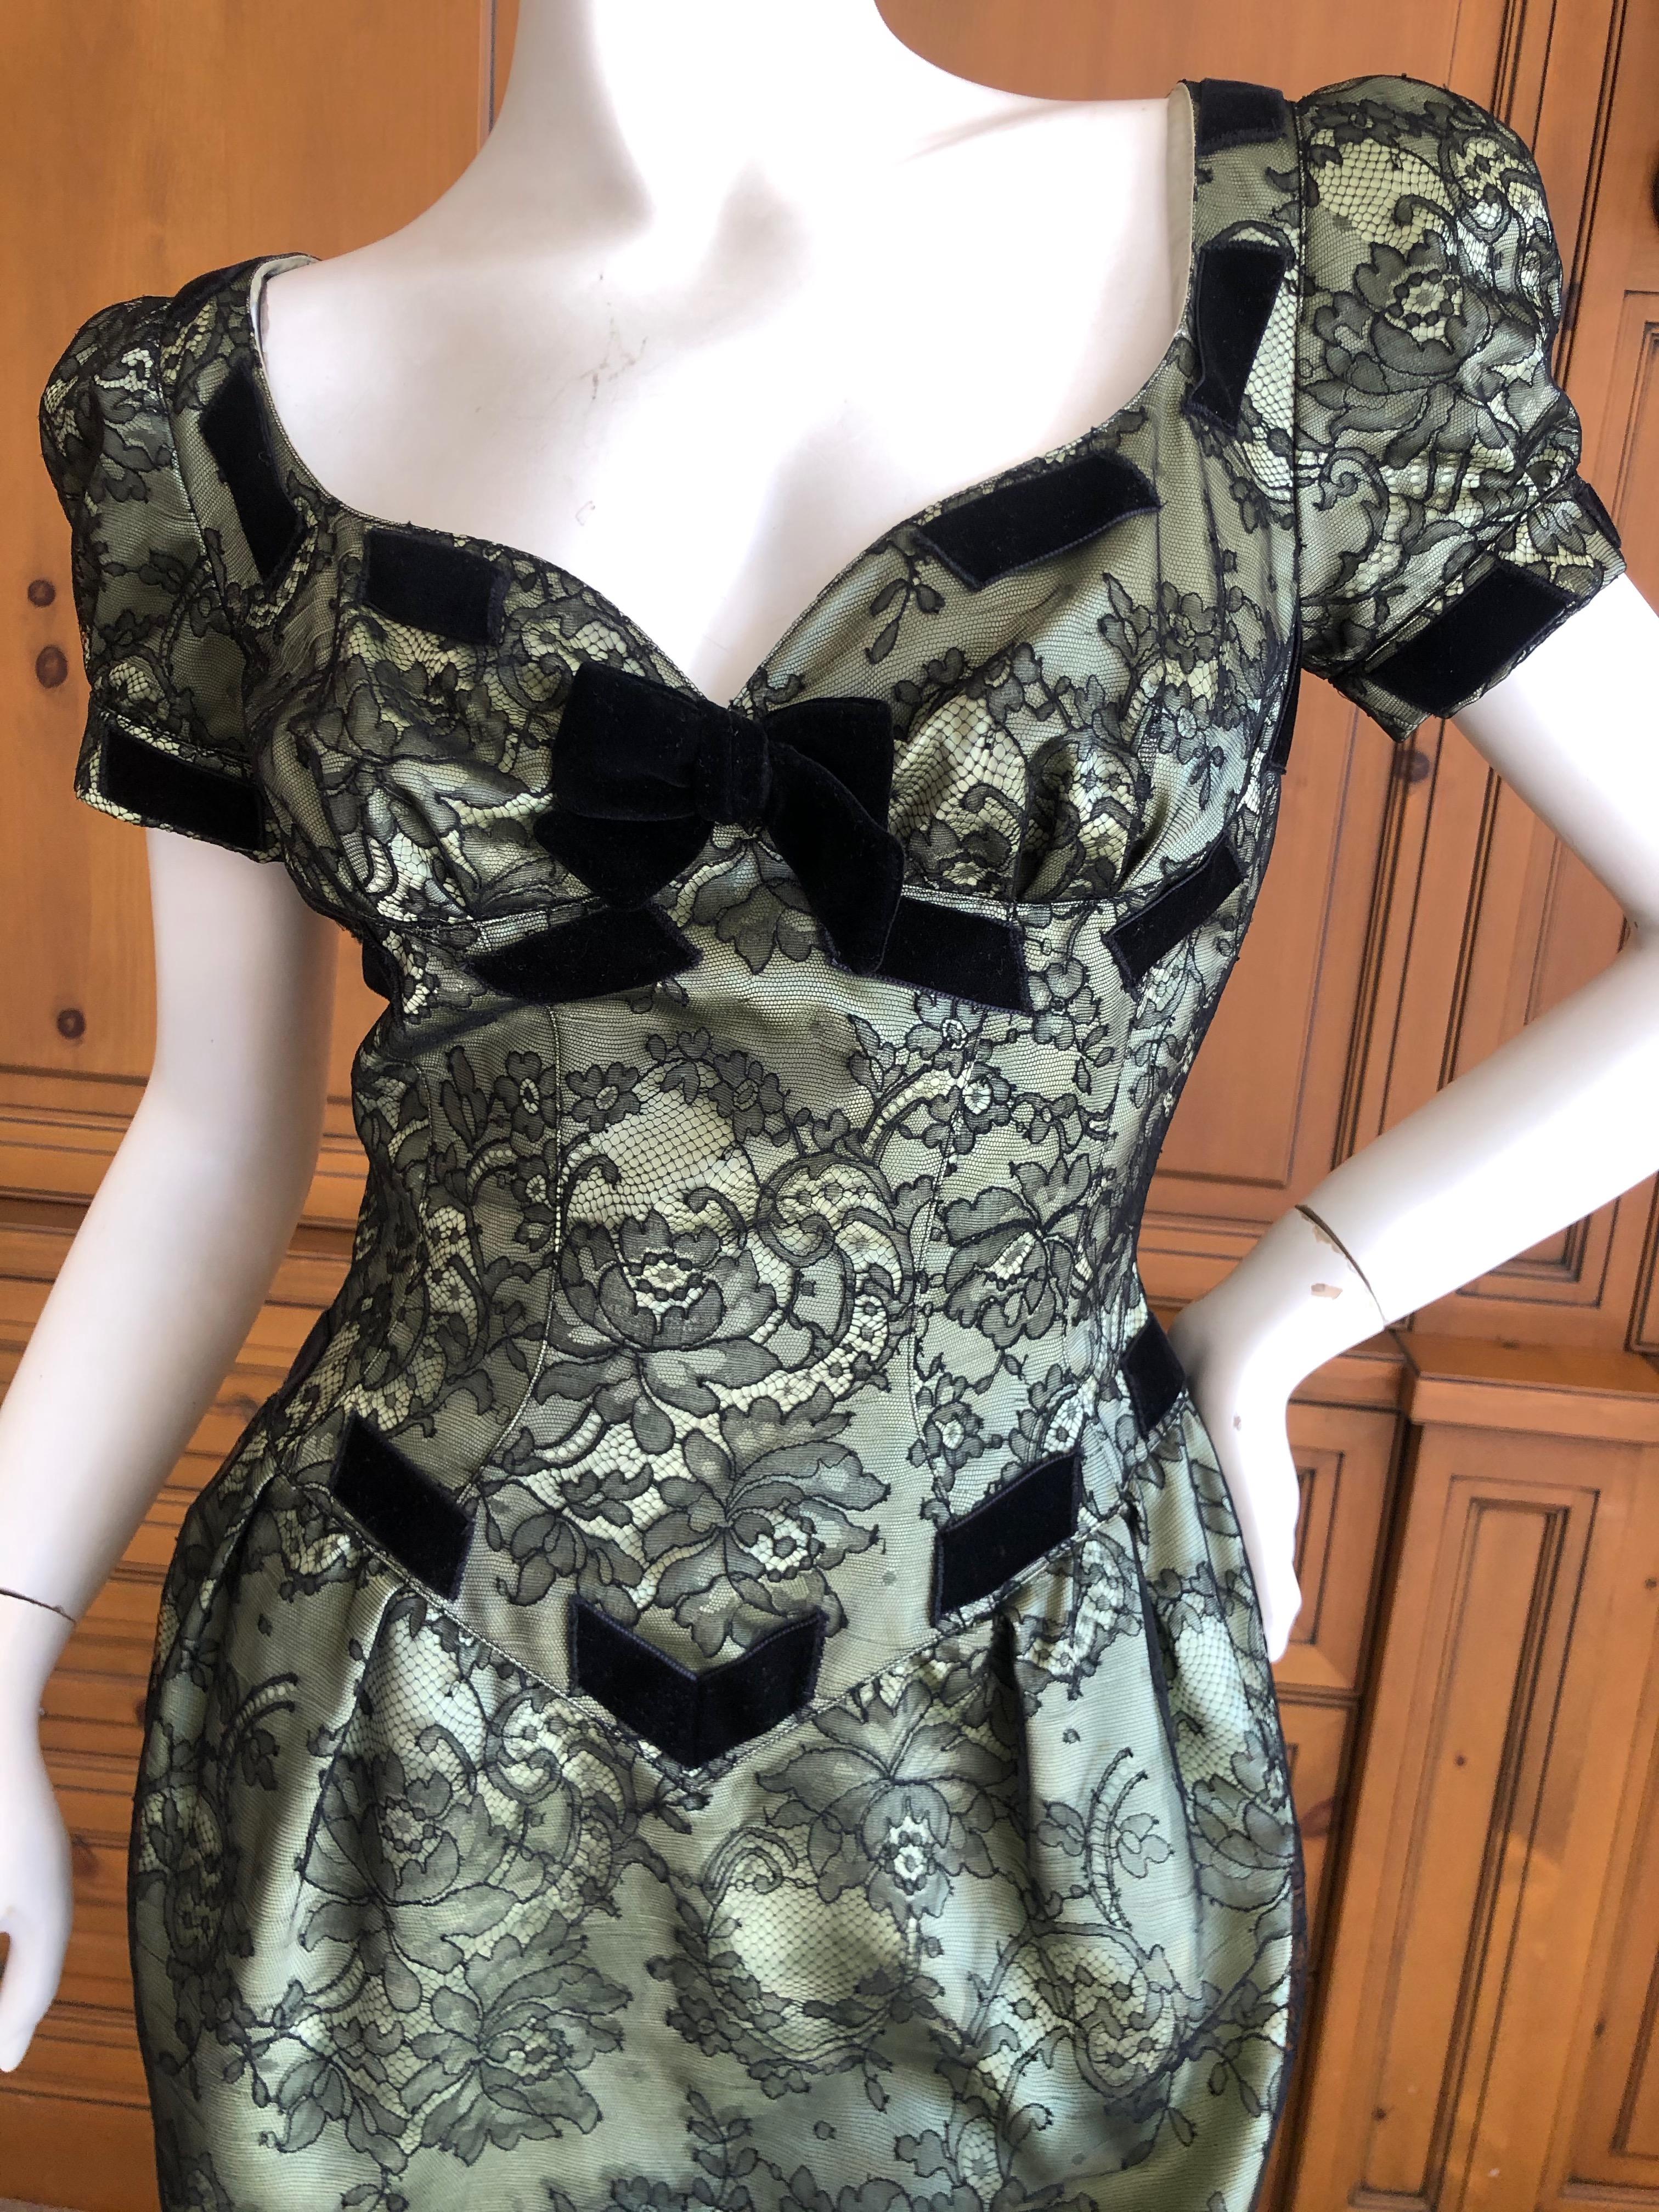 Thierry Mugler Vintage 80's Sexy Silk Lined Lace Overlay Cocktail Dress
This is so much prettier than the photos show.
Size 38
 Bust 38